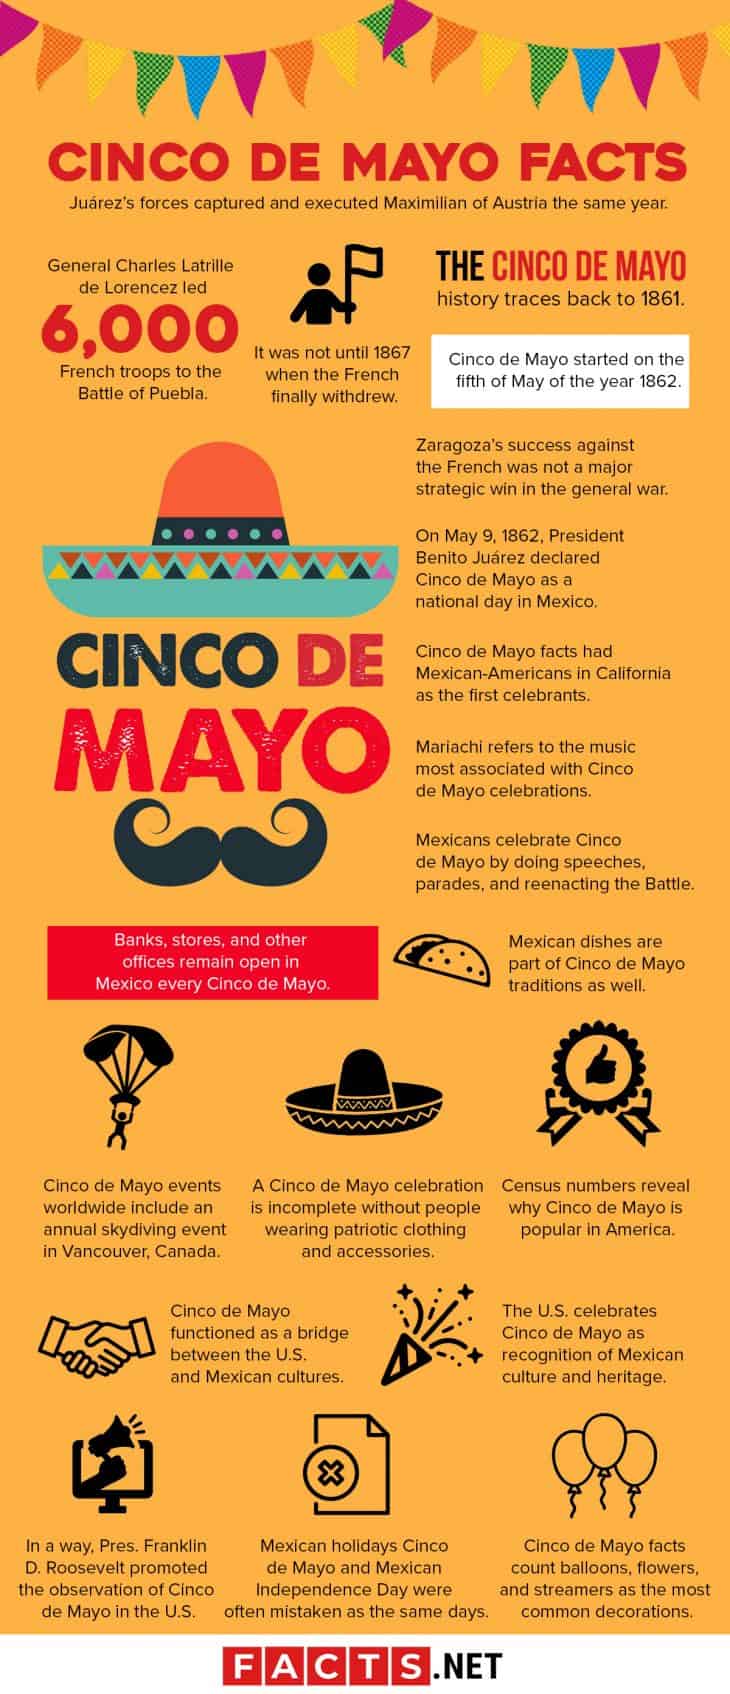 50 Cinco de Mayo Facts To Celebrate About Facts net